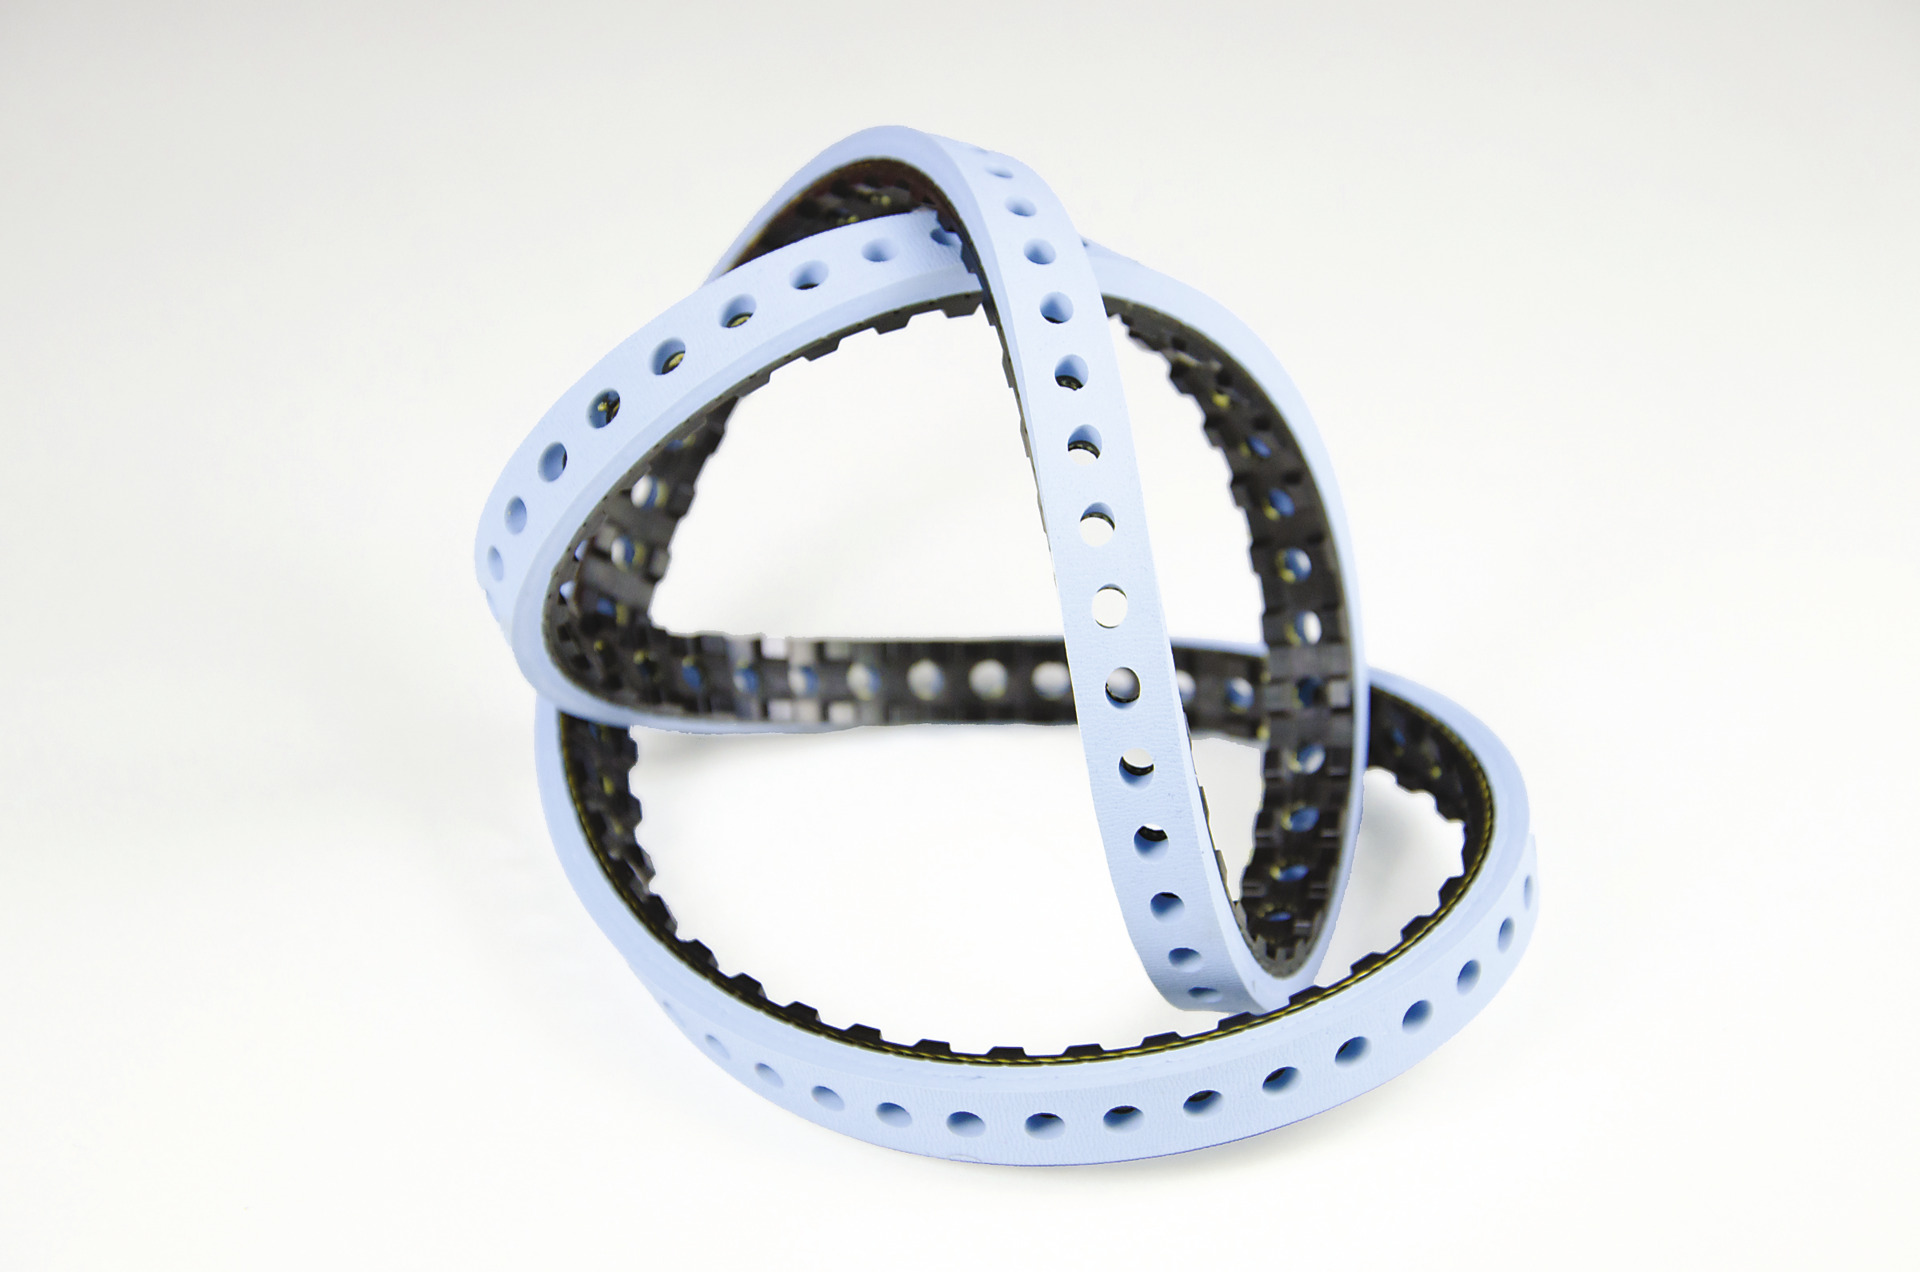 Seamless and Grabber belts